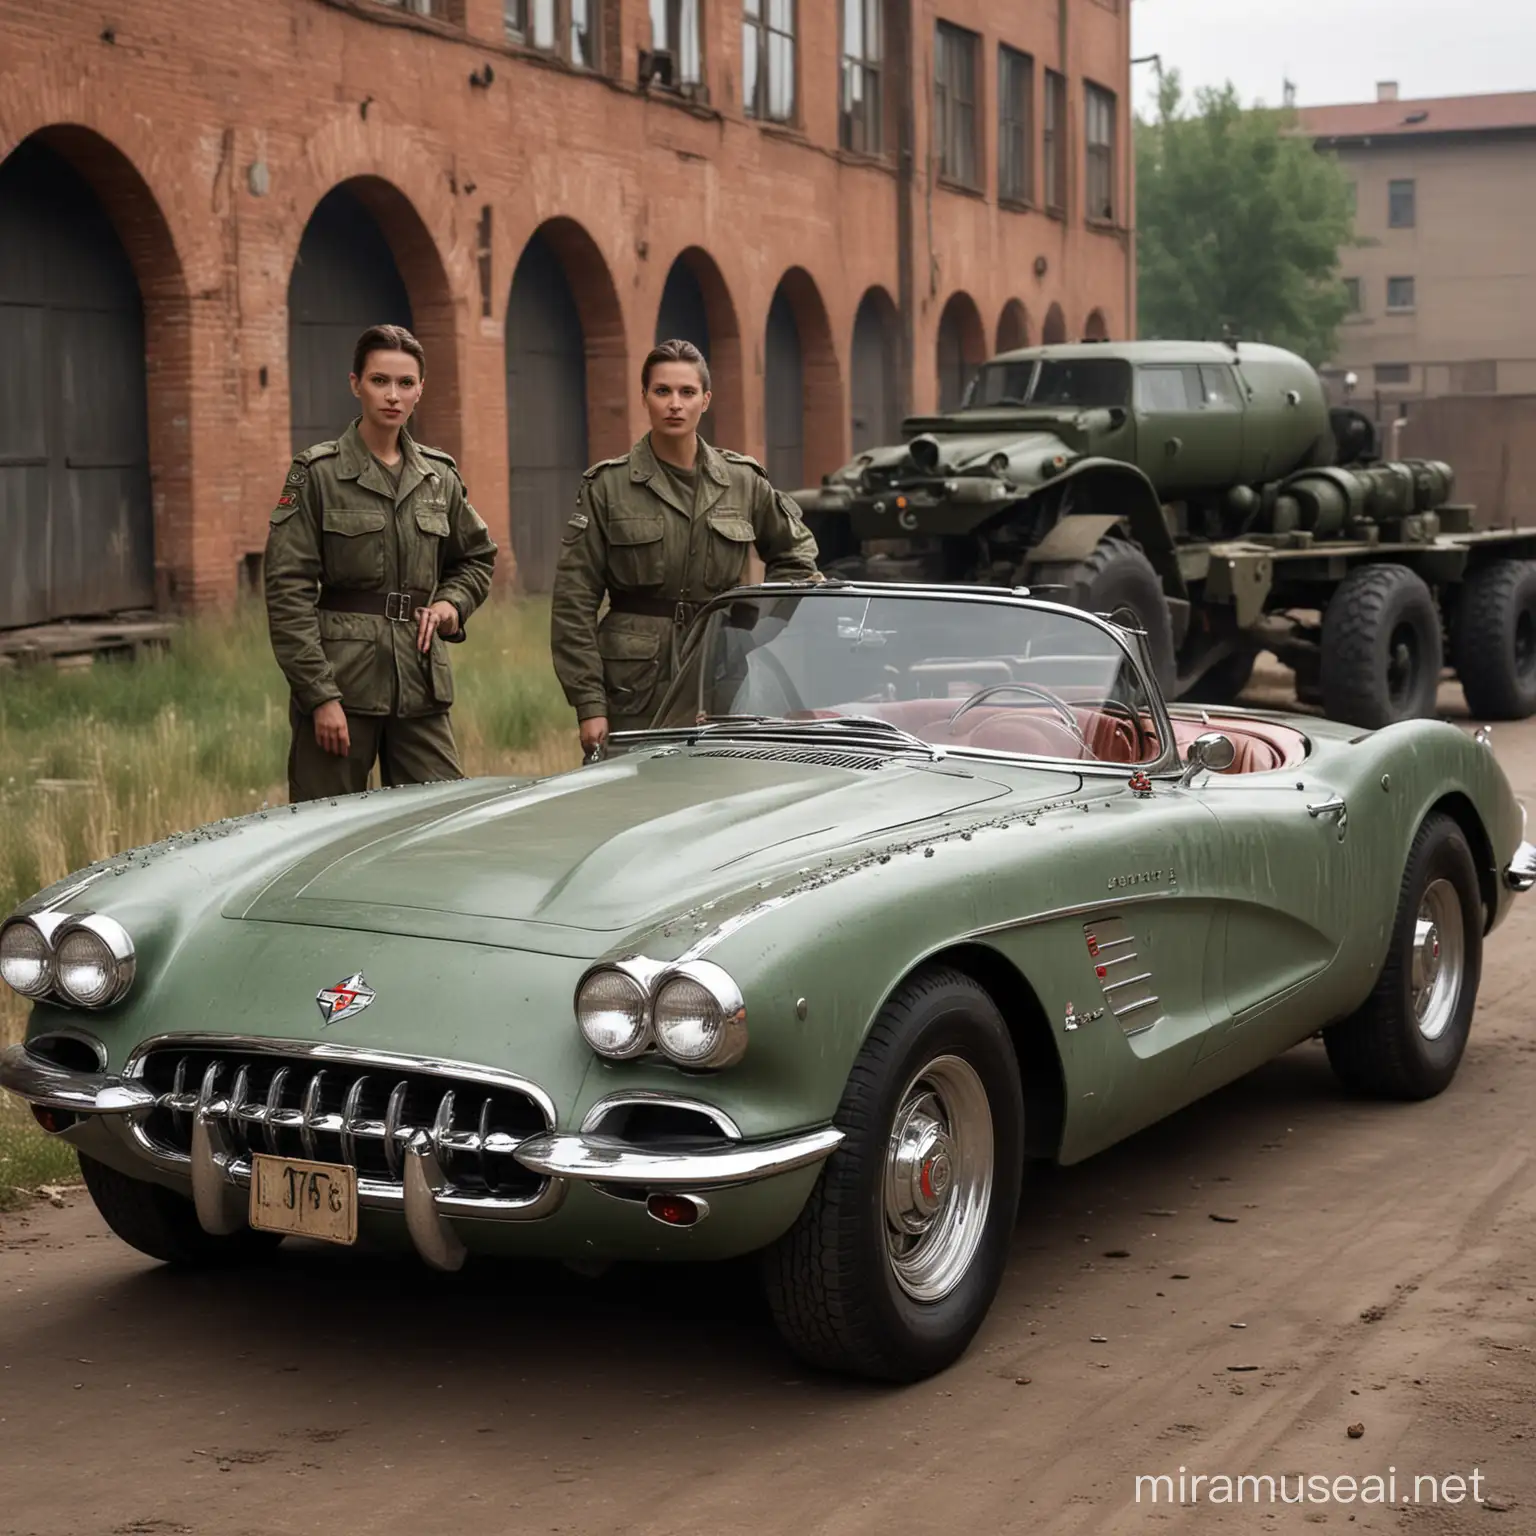 1958 chevrolet corvette if it was redesigned in a waring russian dystopia with rustic army paint. posing by the car is a kgb supermodel